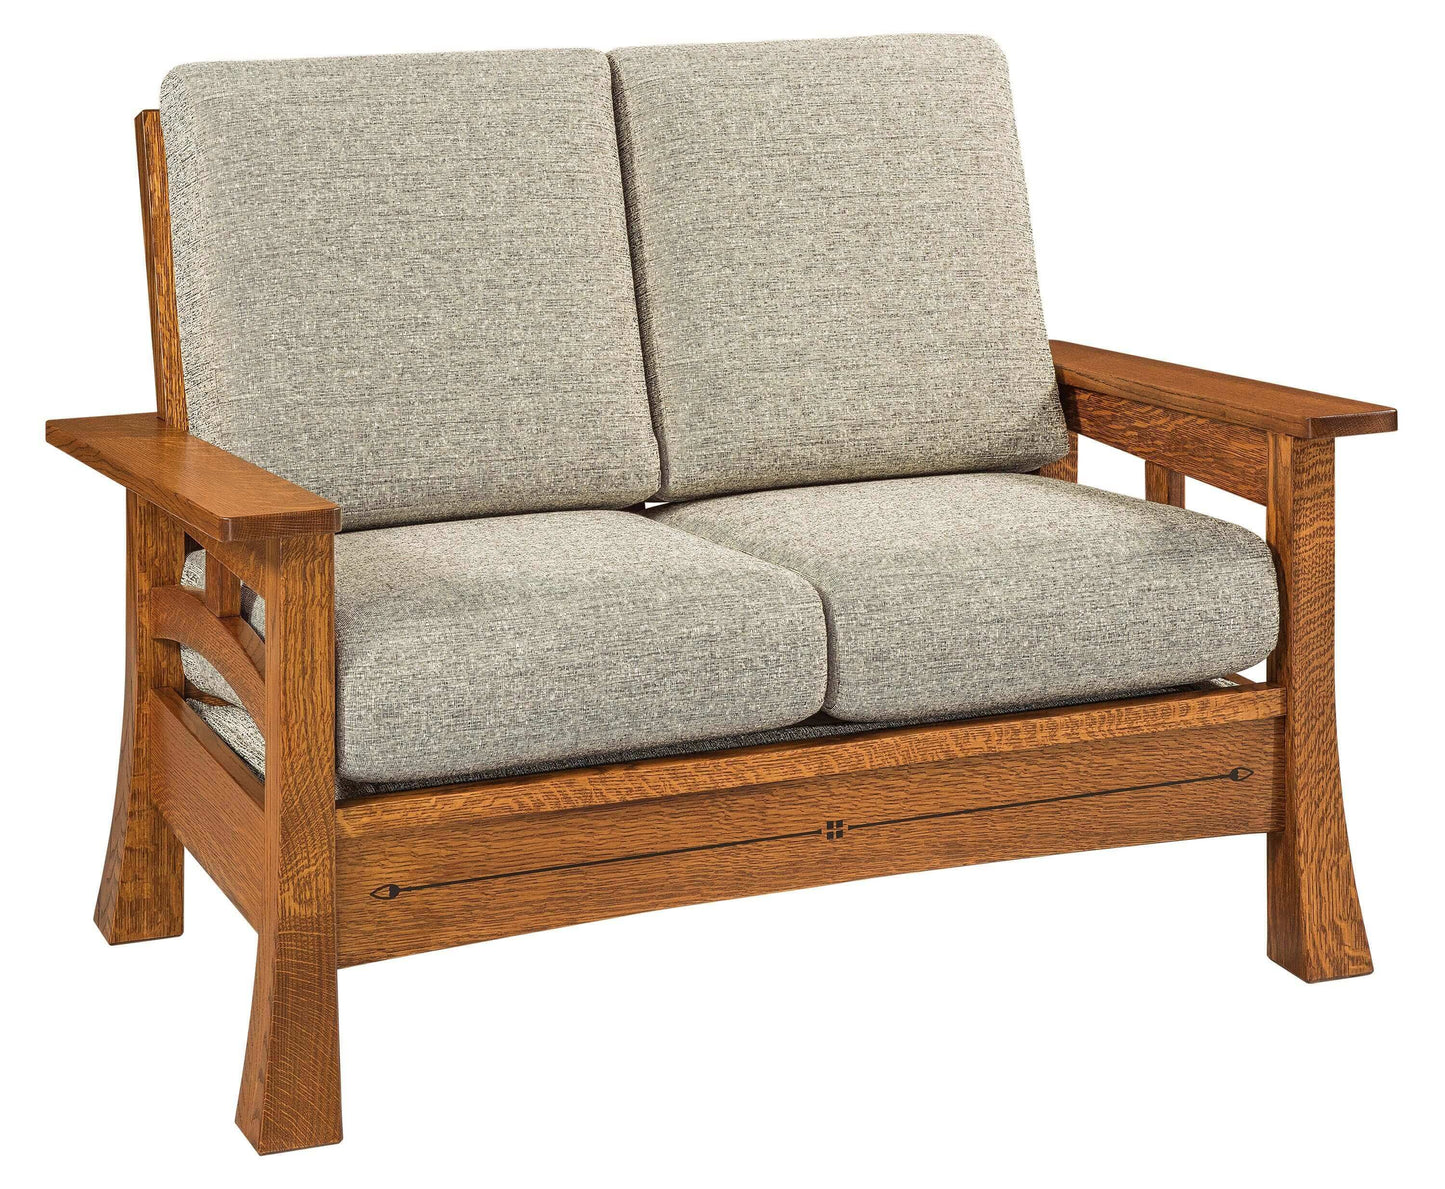 Amish USA Made Handcrafted Brady Loveseat sold by Online Amish Furniture LLC